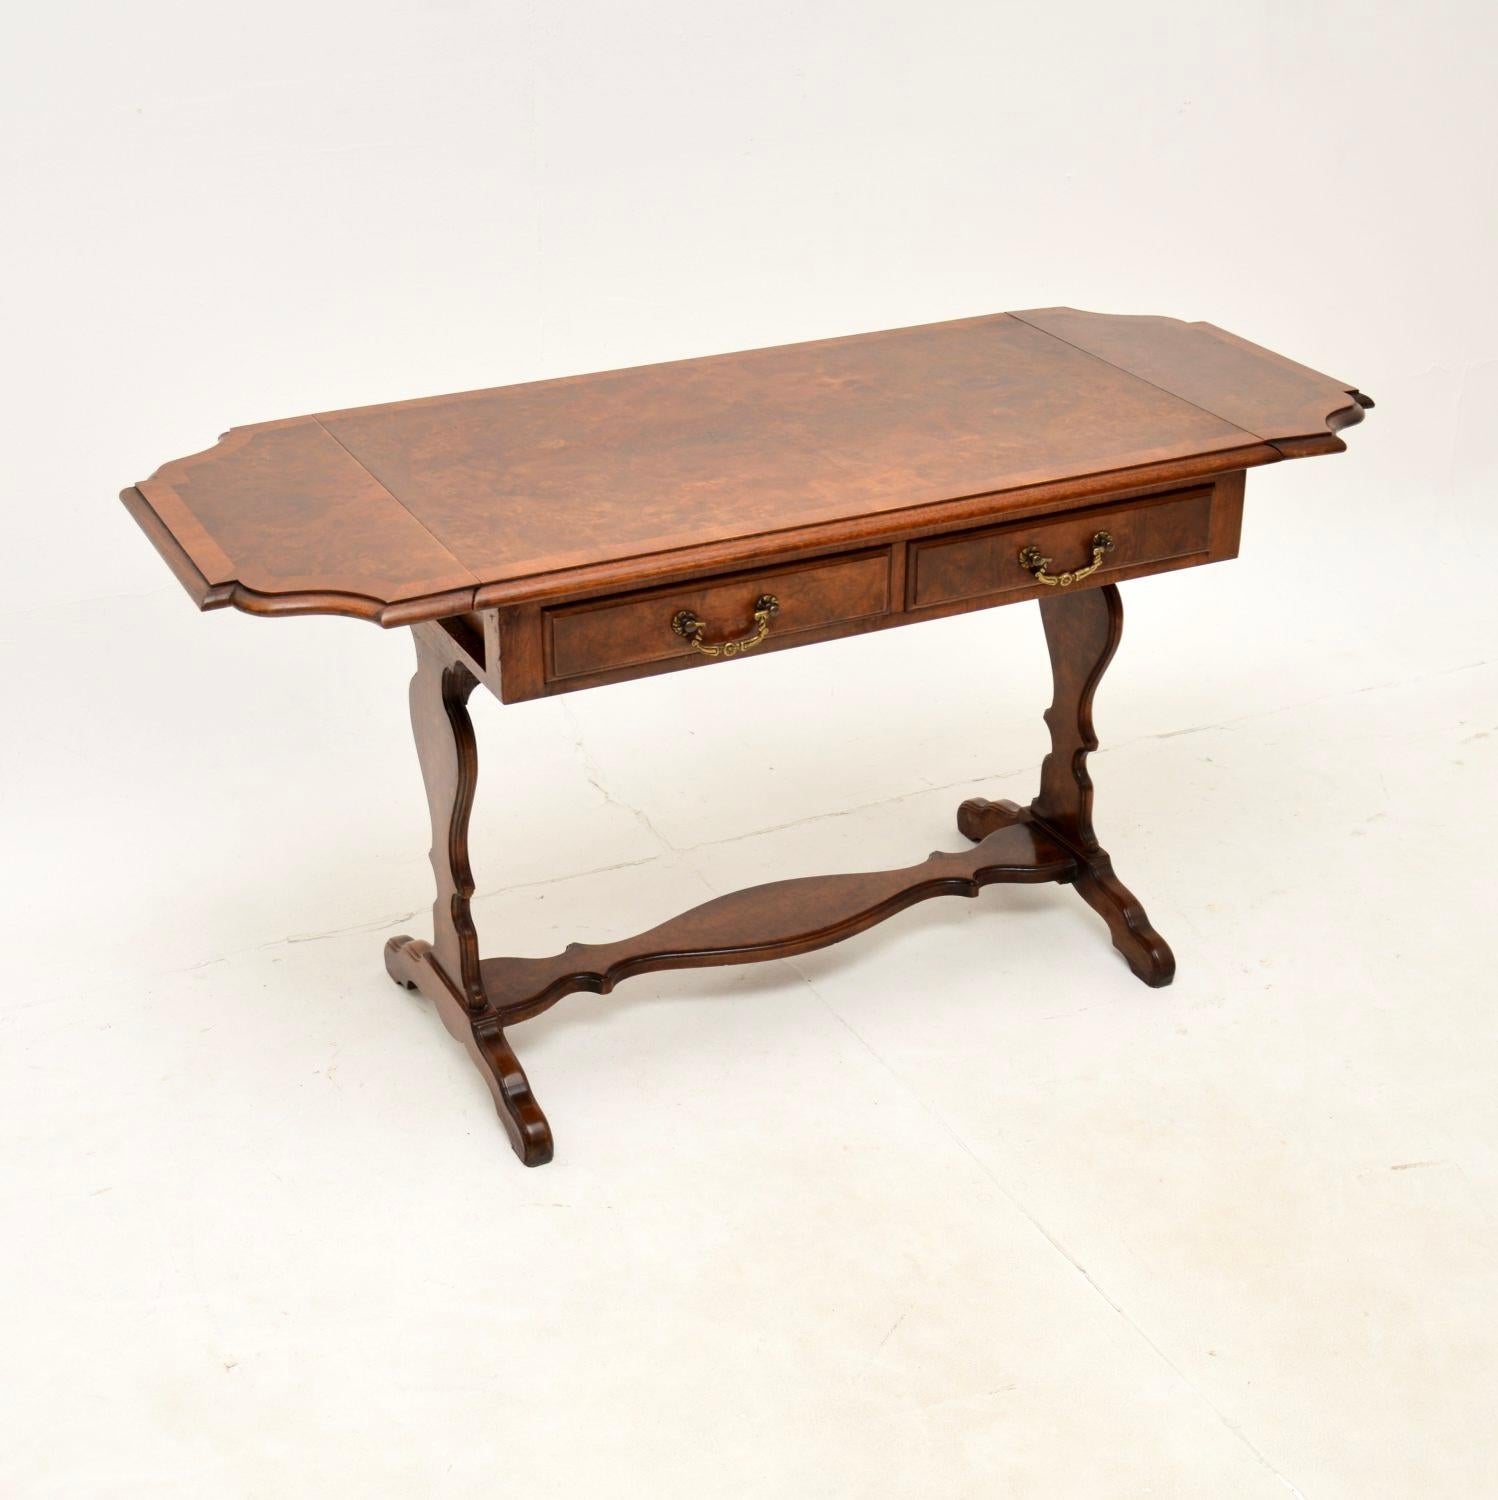 A beautiful antique burr walnut drop leaf coffee / side table. This was made in England, it dates from around the 1930’s.

It is very well made and is of excellent quality. It is a useful size, and the drop ends can be lifted to extend the surface.